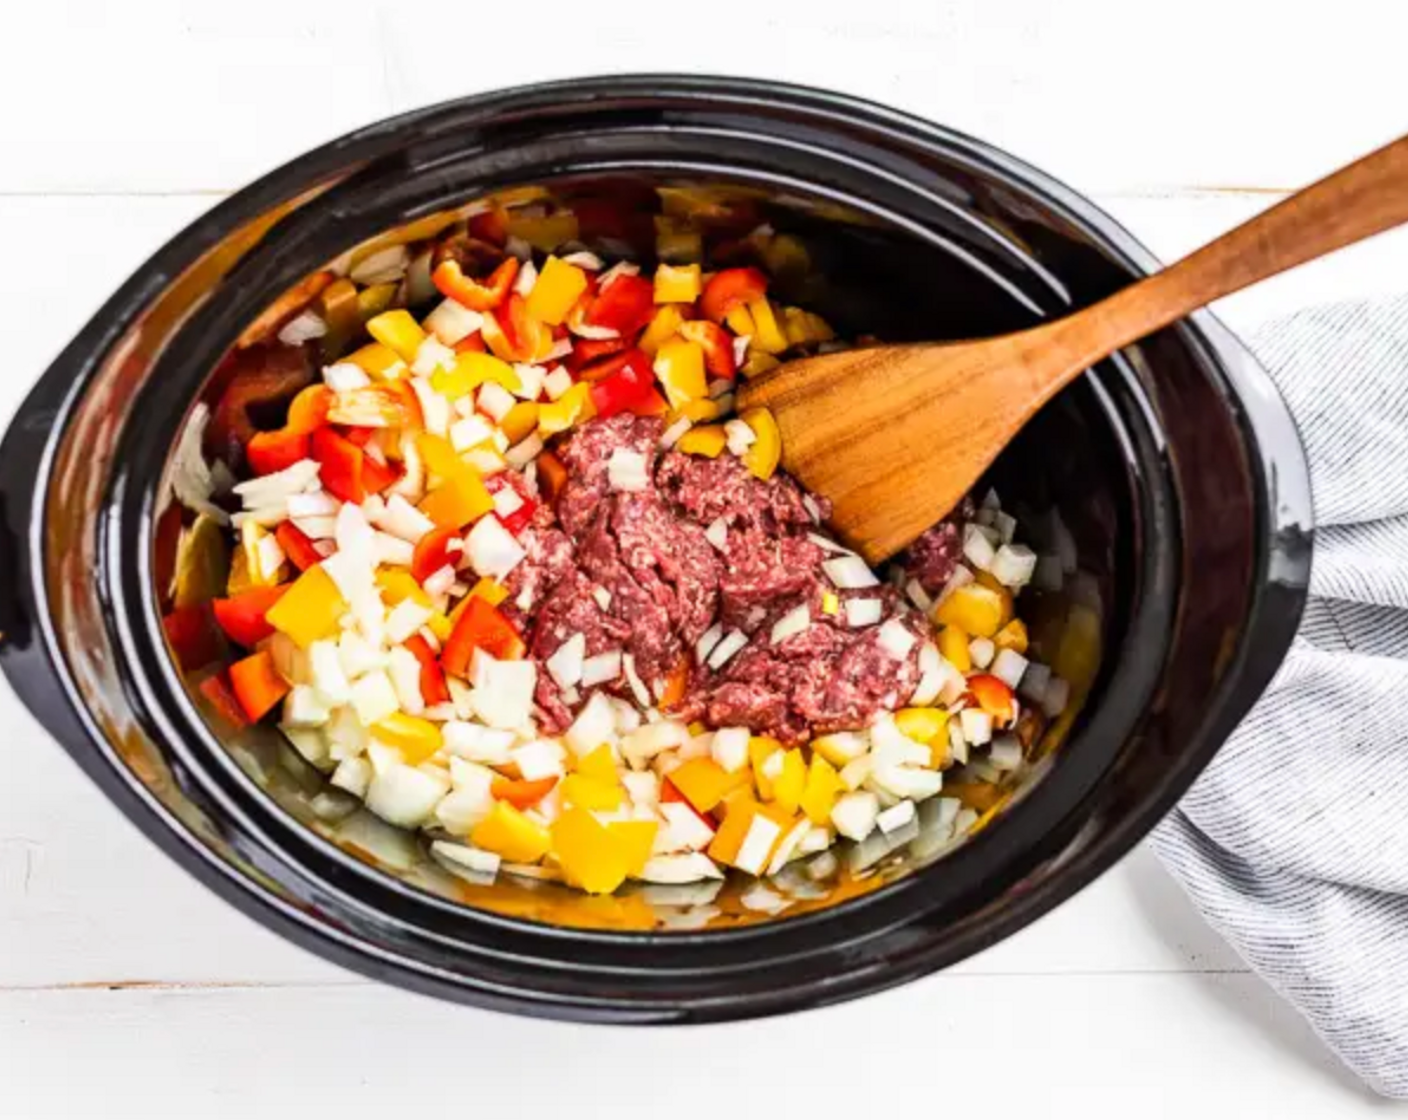 step 1 Place the Onion (1), Red Bell Peppers (2), and Ground Beef (1 lb) into the slow cooker bowl. Use a wooden spoon to break up the meat into small pieces.